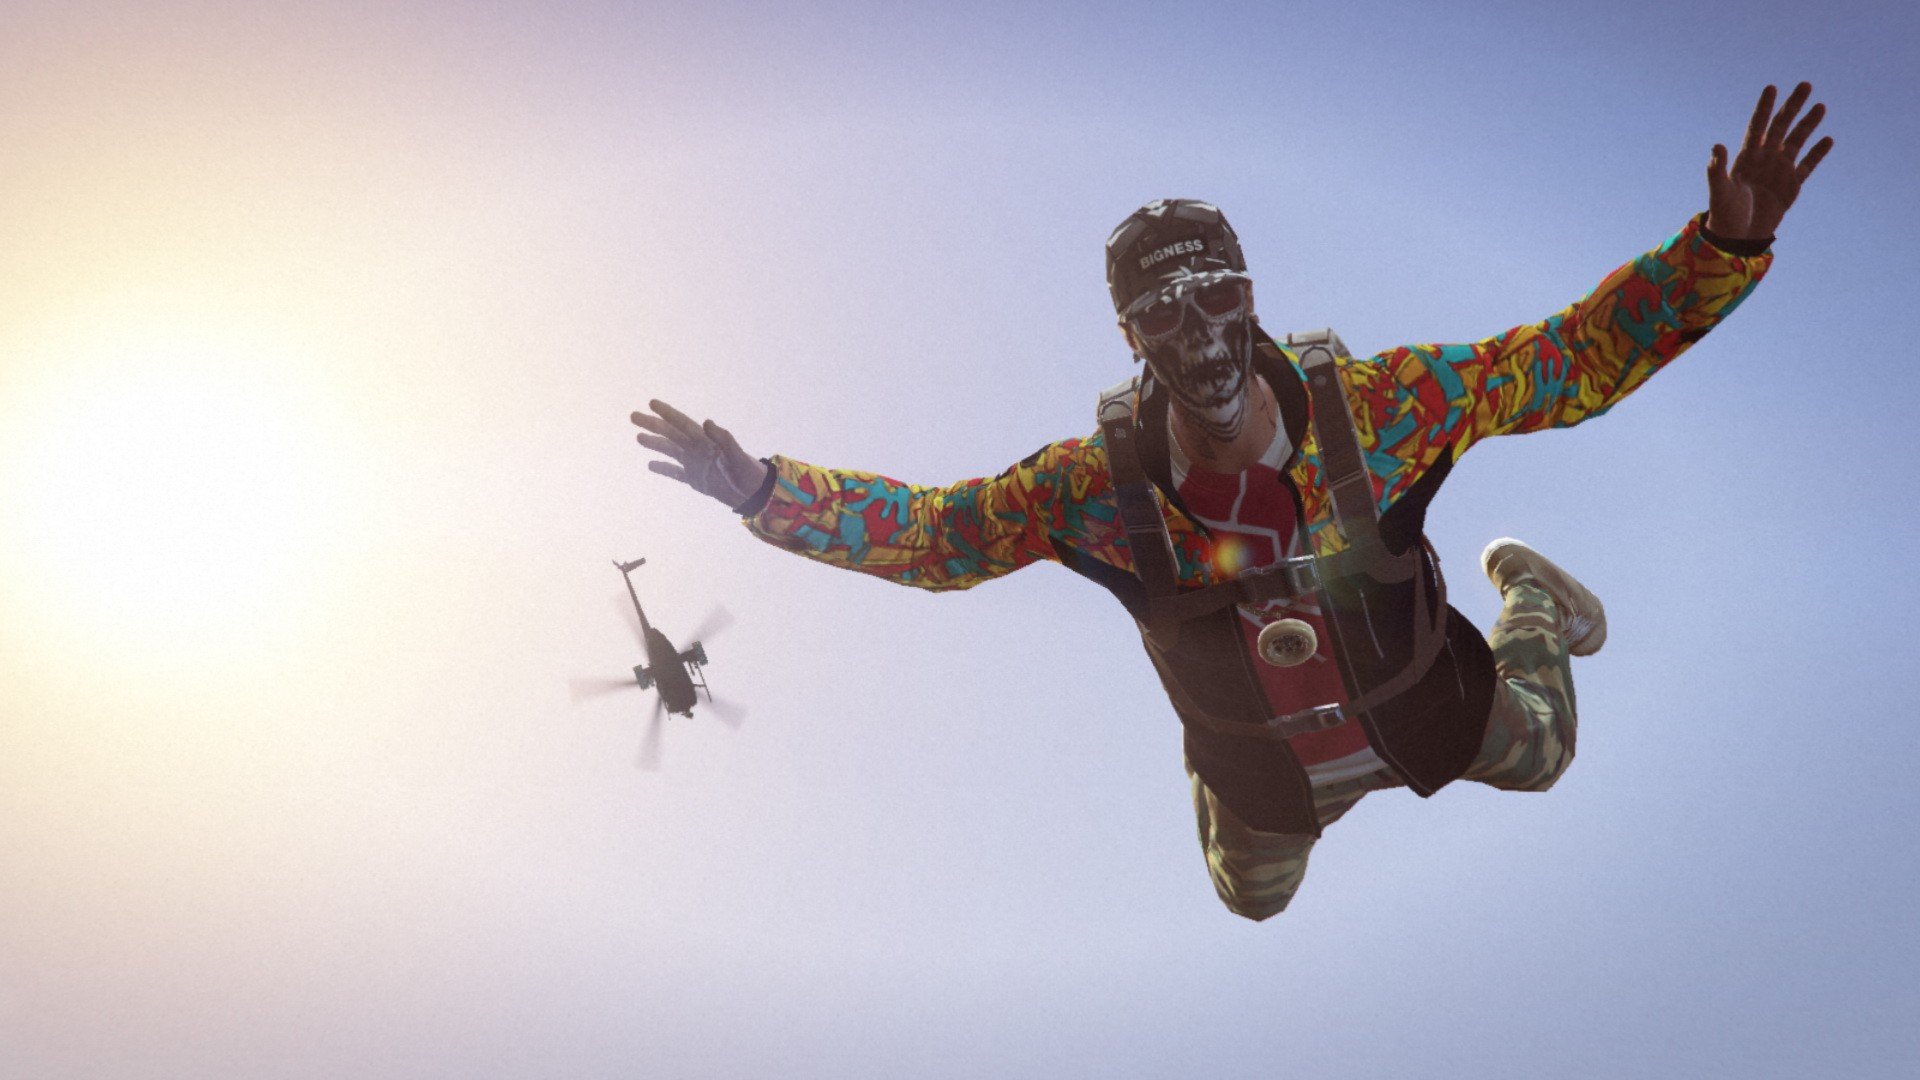 Grand Theft Auto V, Grand Theft Auto, Grand Theft Auto Online, Helicopters, Parachutes, Rockstar Games, Freefall Wallpaper